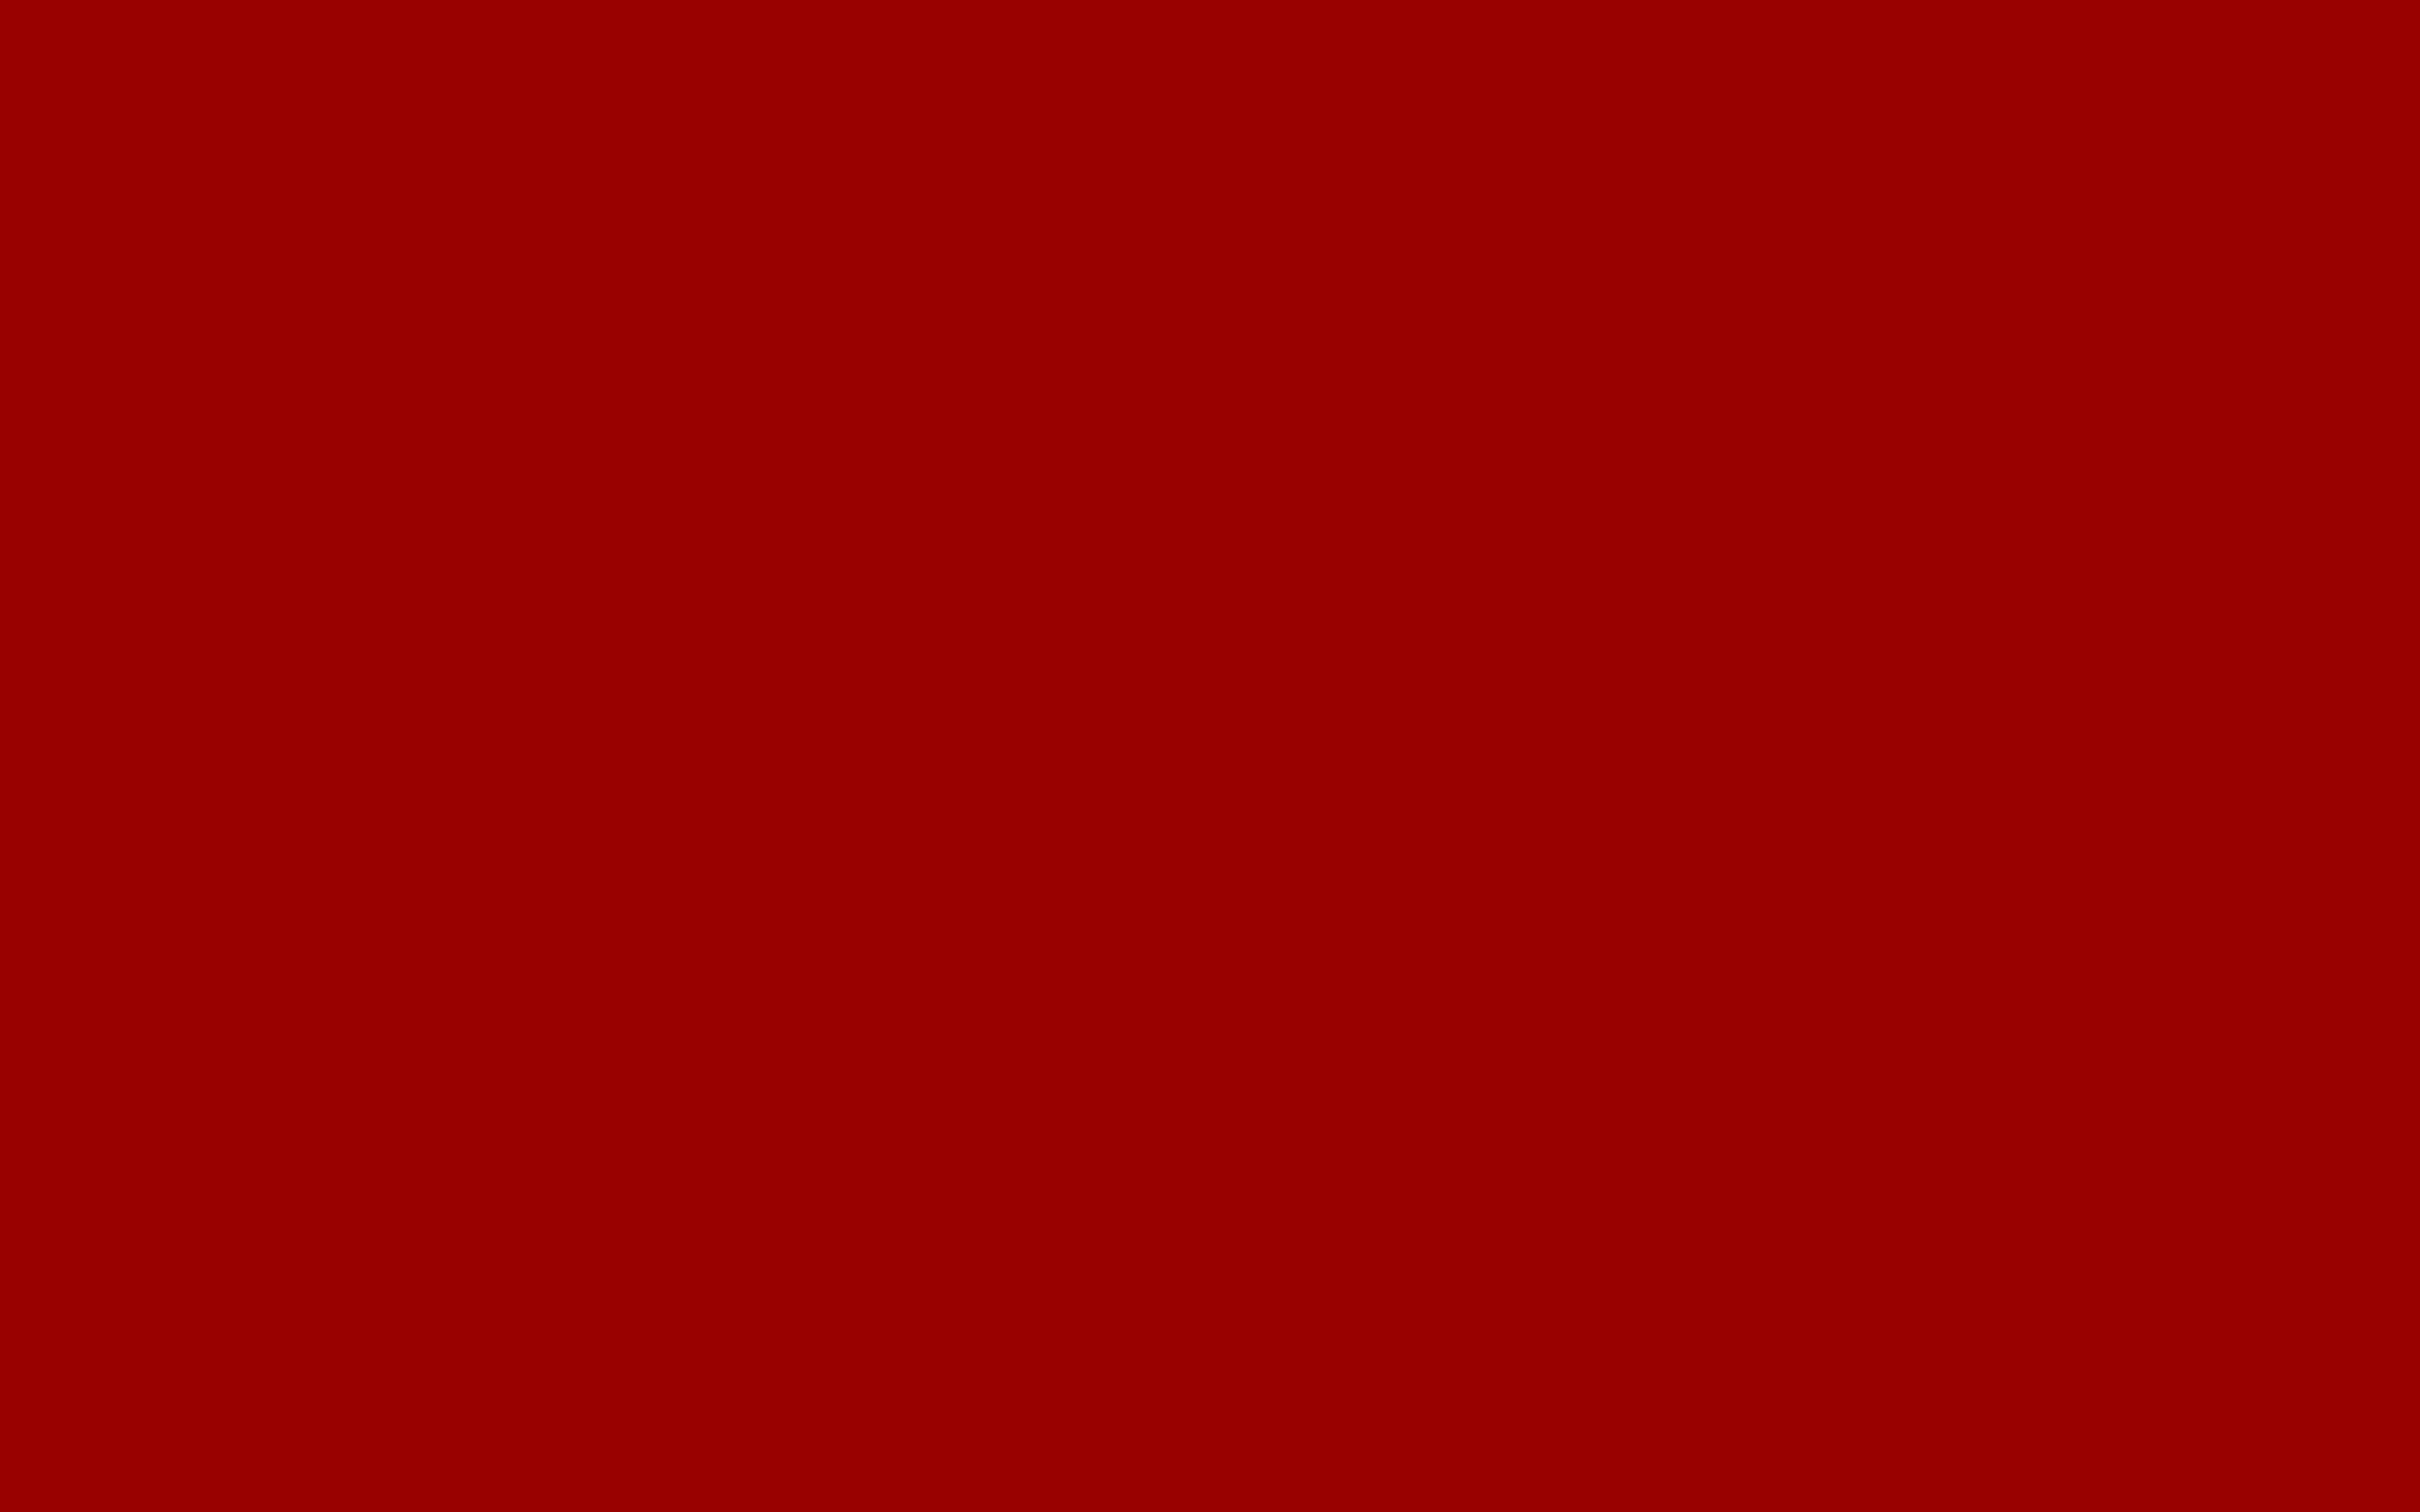 2560x1600-ou-crimson-red-solid-color-background.jpg